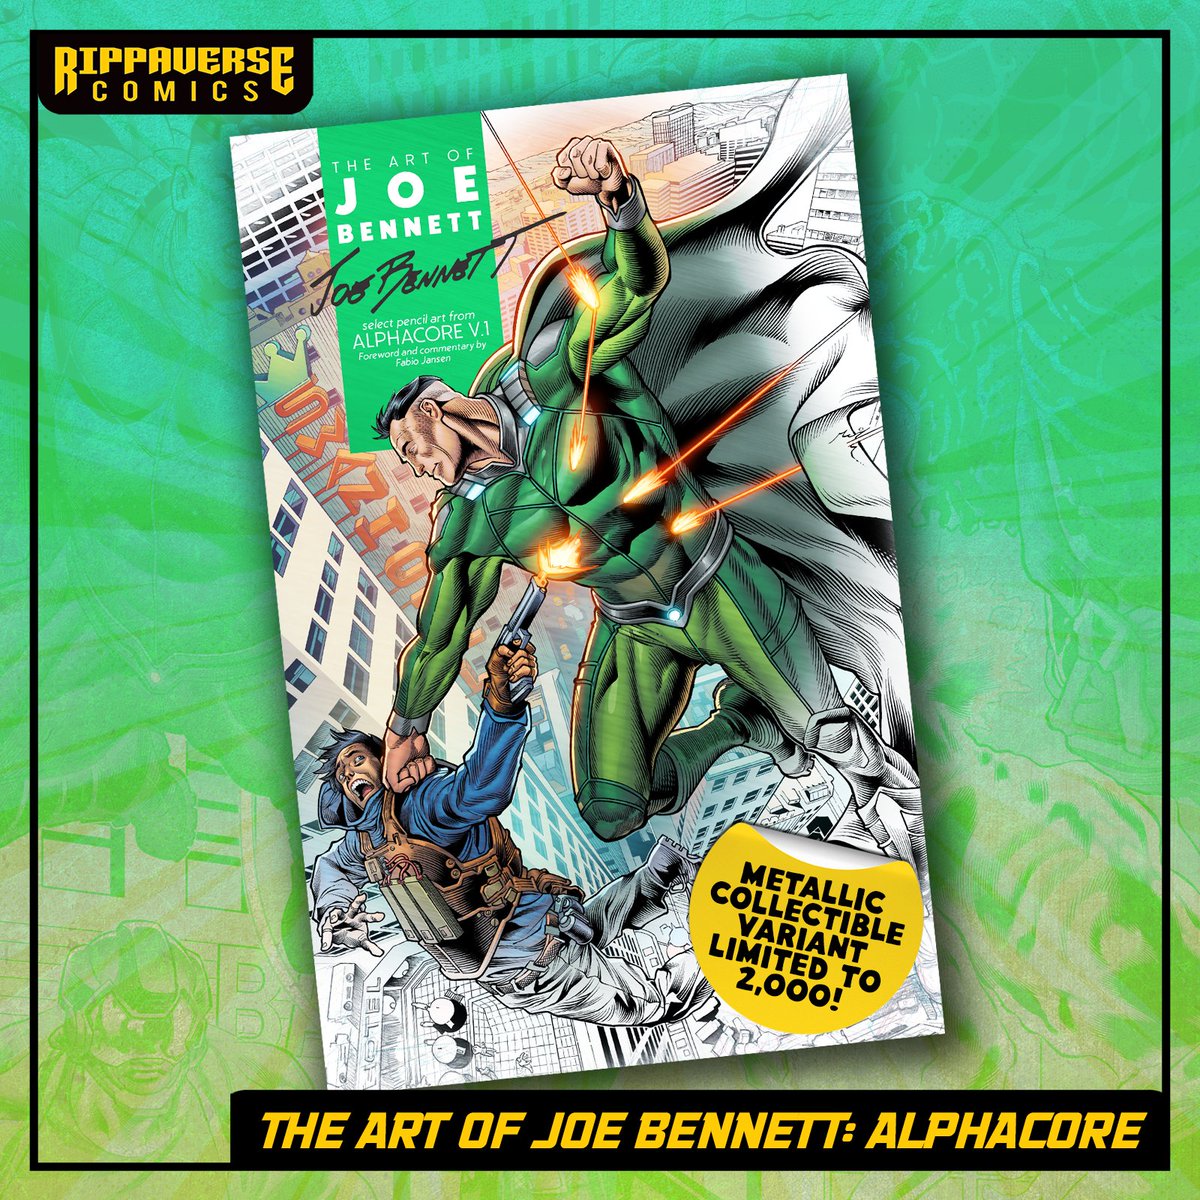 Itching for some more art books on your shelf? We can help with that. Head to the Rippaverse store and grab a copy of 'The Art of Joe Bennett: Alphacore!' Joe Bennett's details are STUNNING and available in a limited metallic variant! Get yours before they're gone!